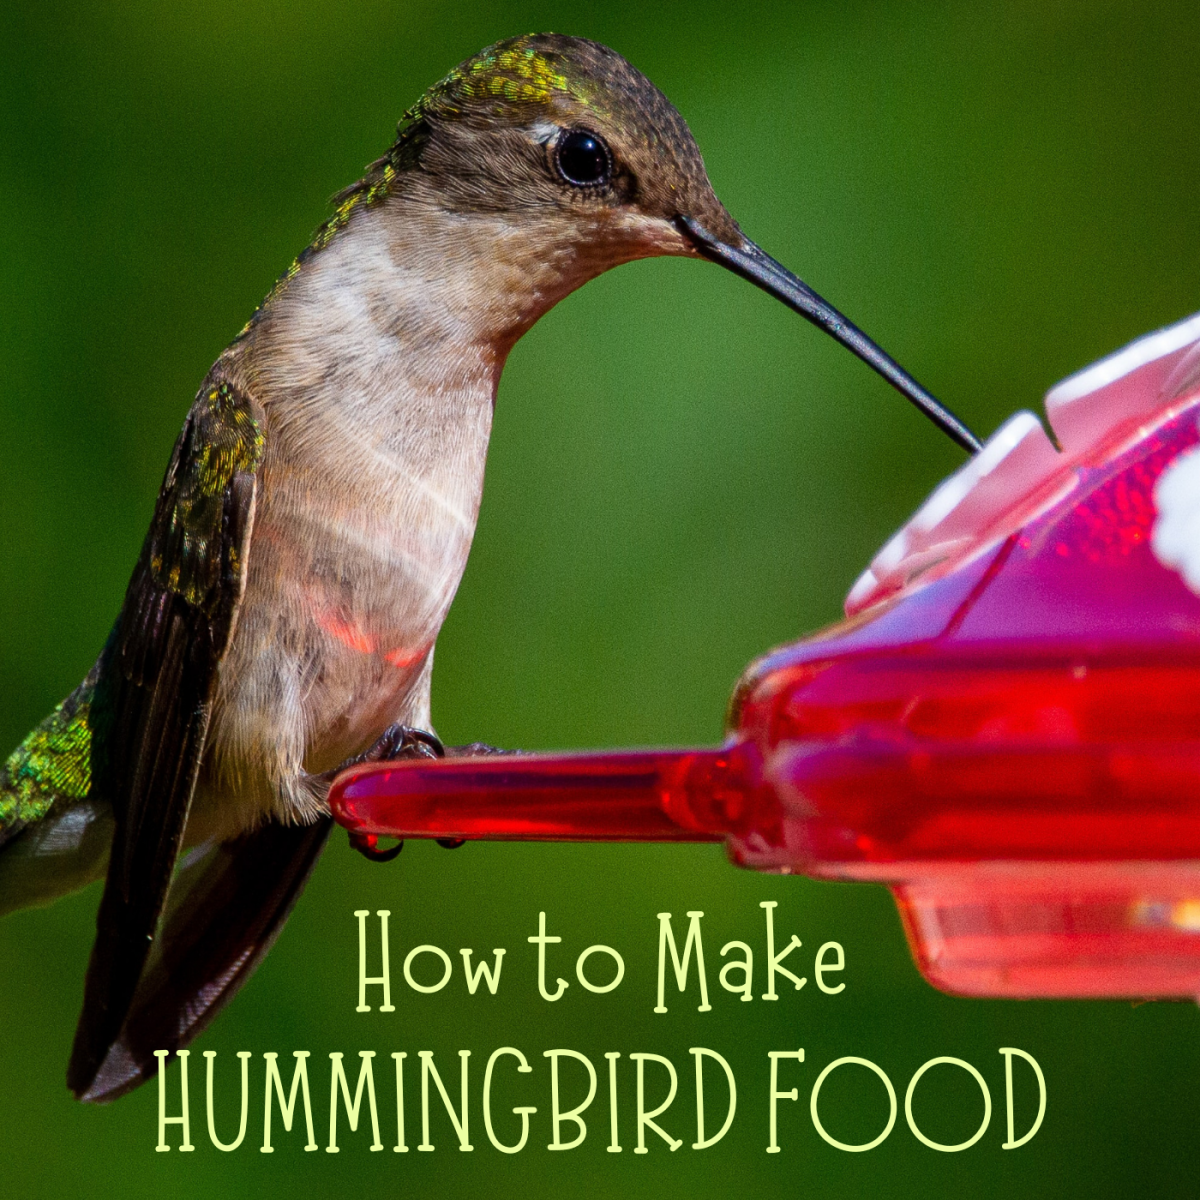 Learn how to make homemade hummingbird food (it's easy!), and see some fascinating facts about these tiny birds.